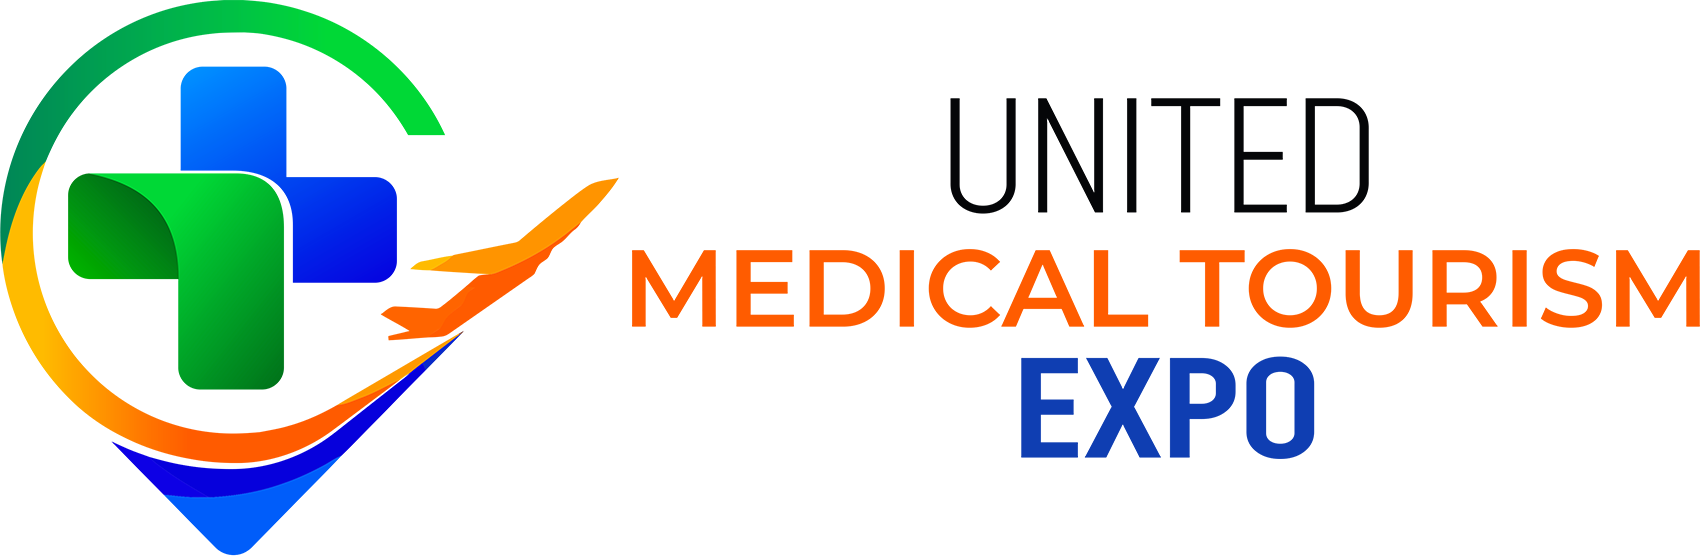 Exhibition of medical and health tourism "United Medical Tourism Expo"